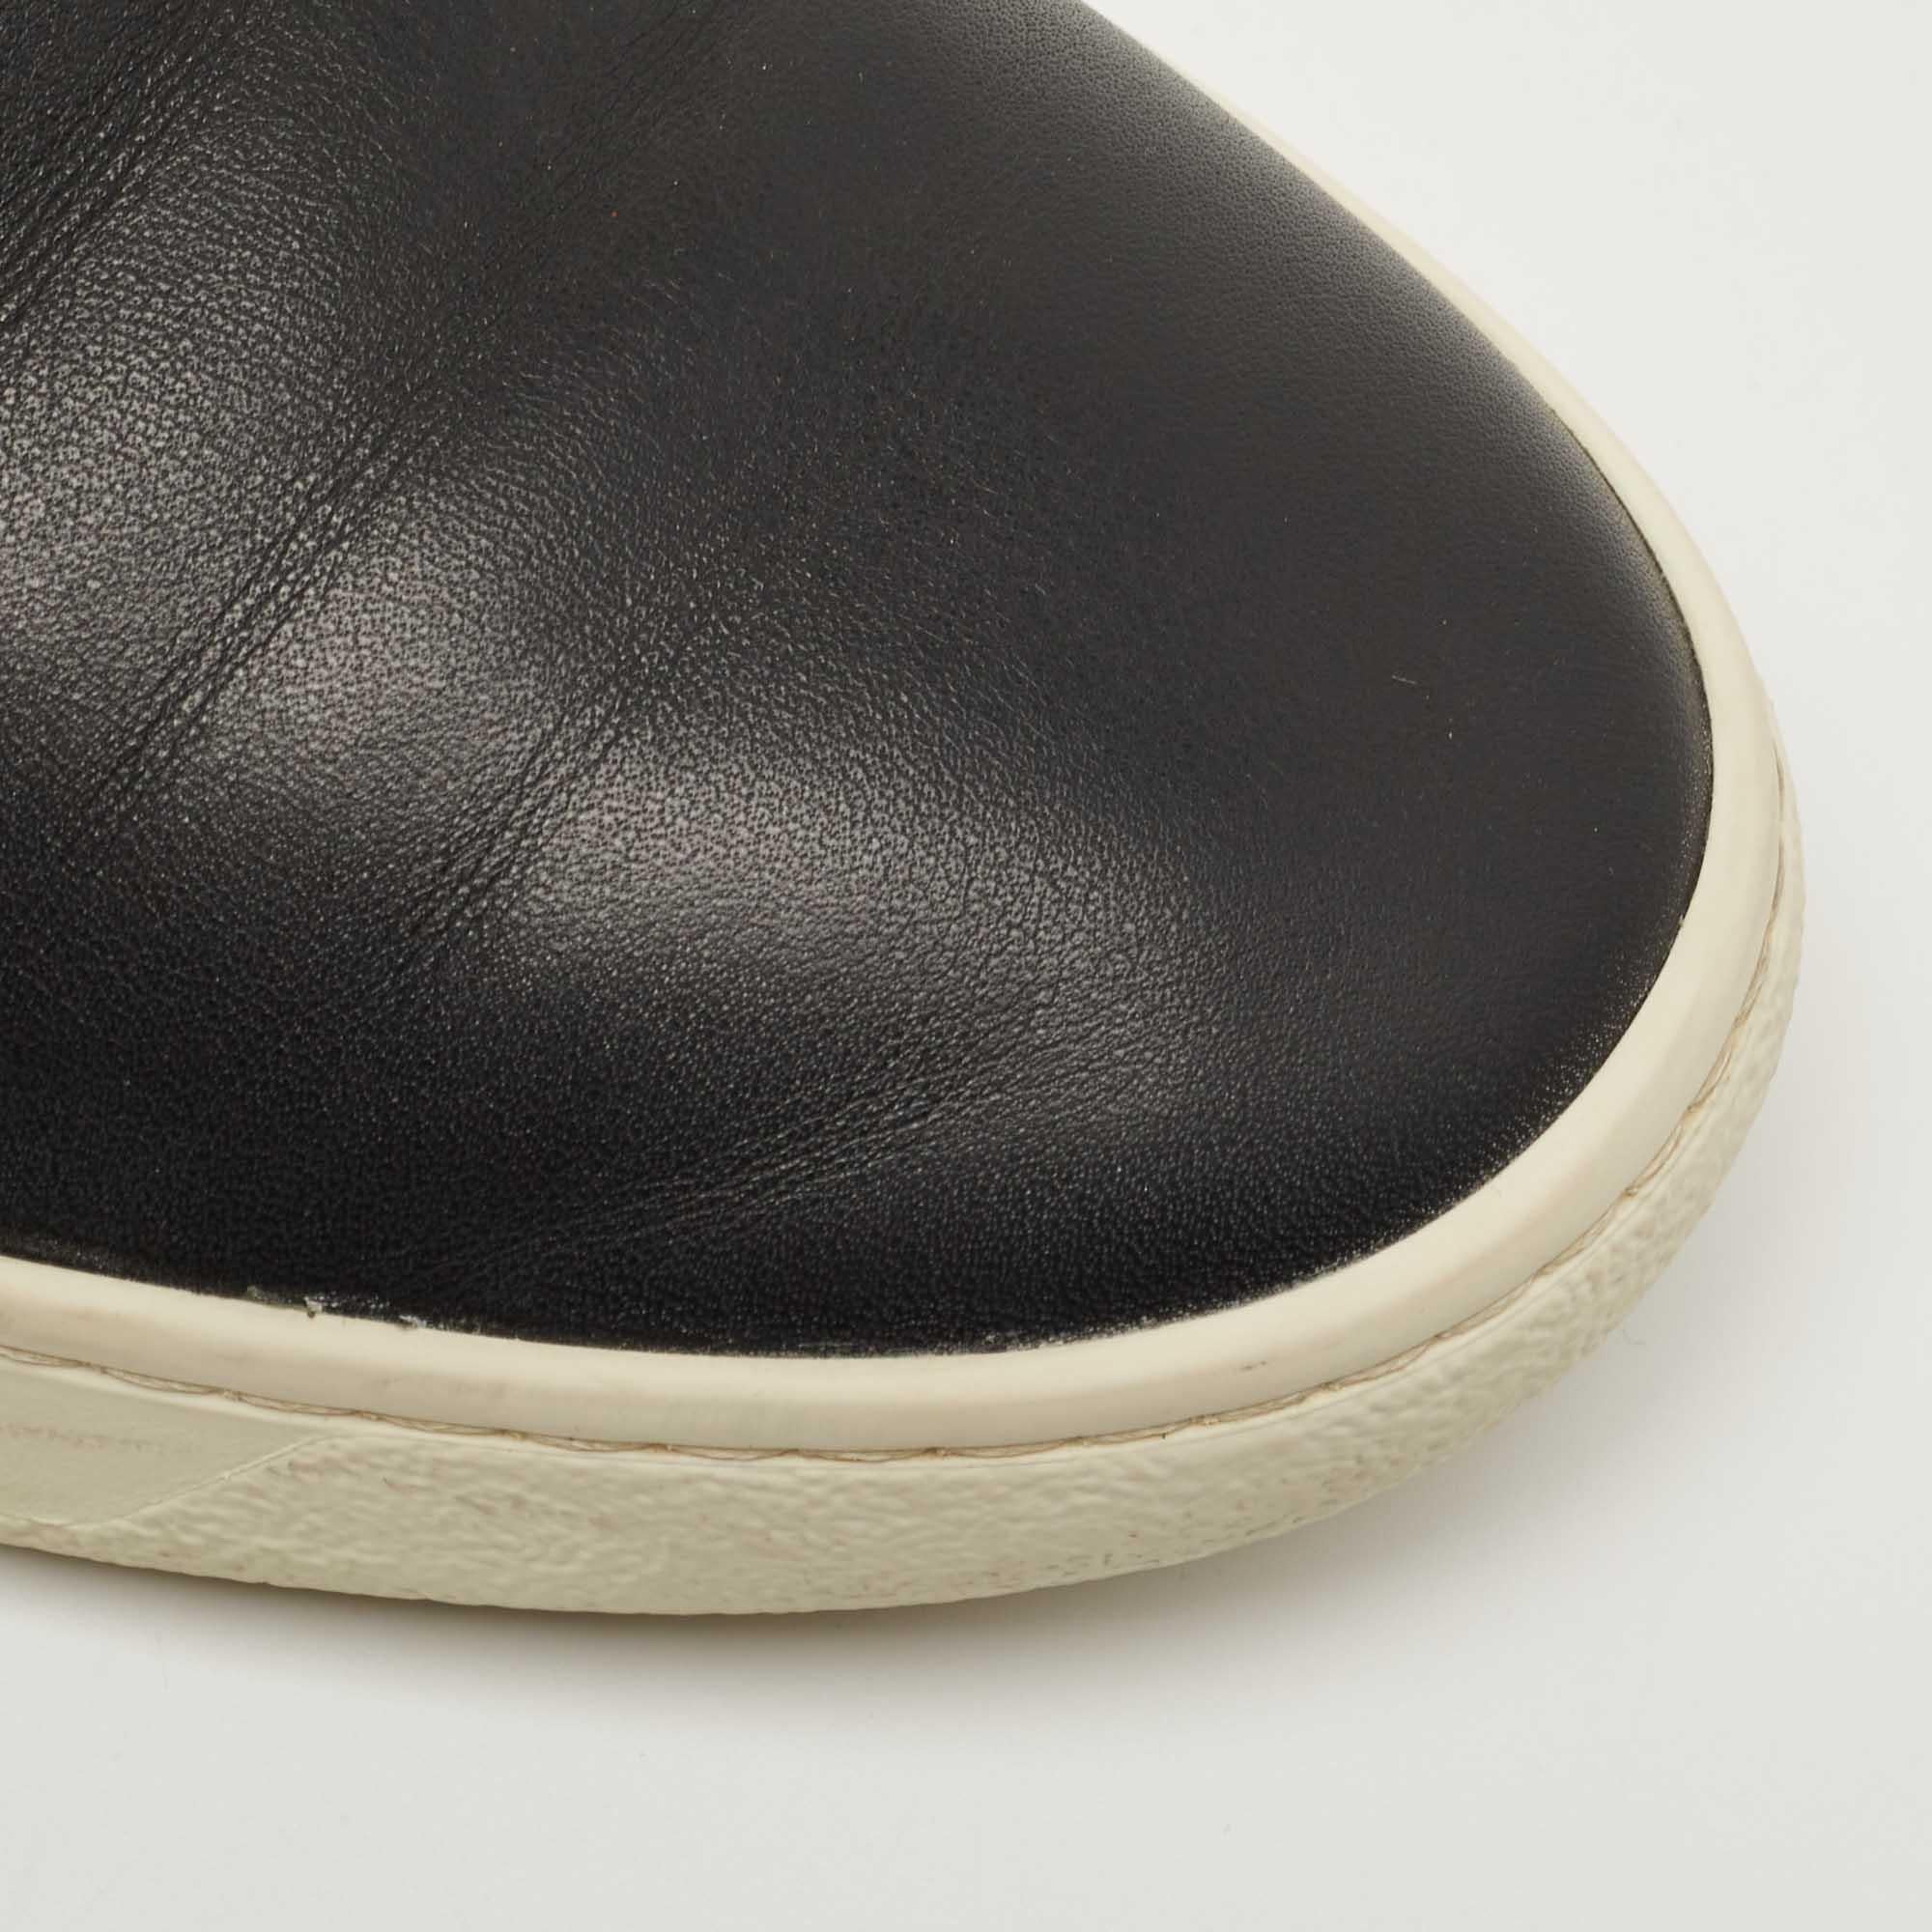 Burberry Black Leather Slip On Sneakers Size 43 For Sale 1